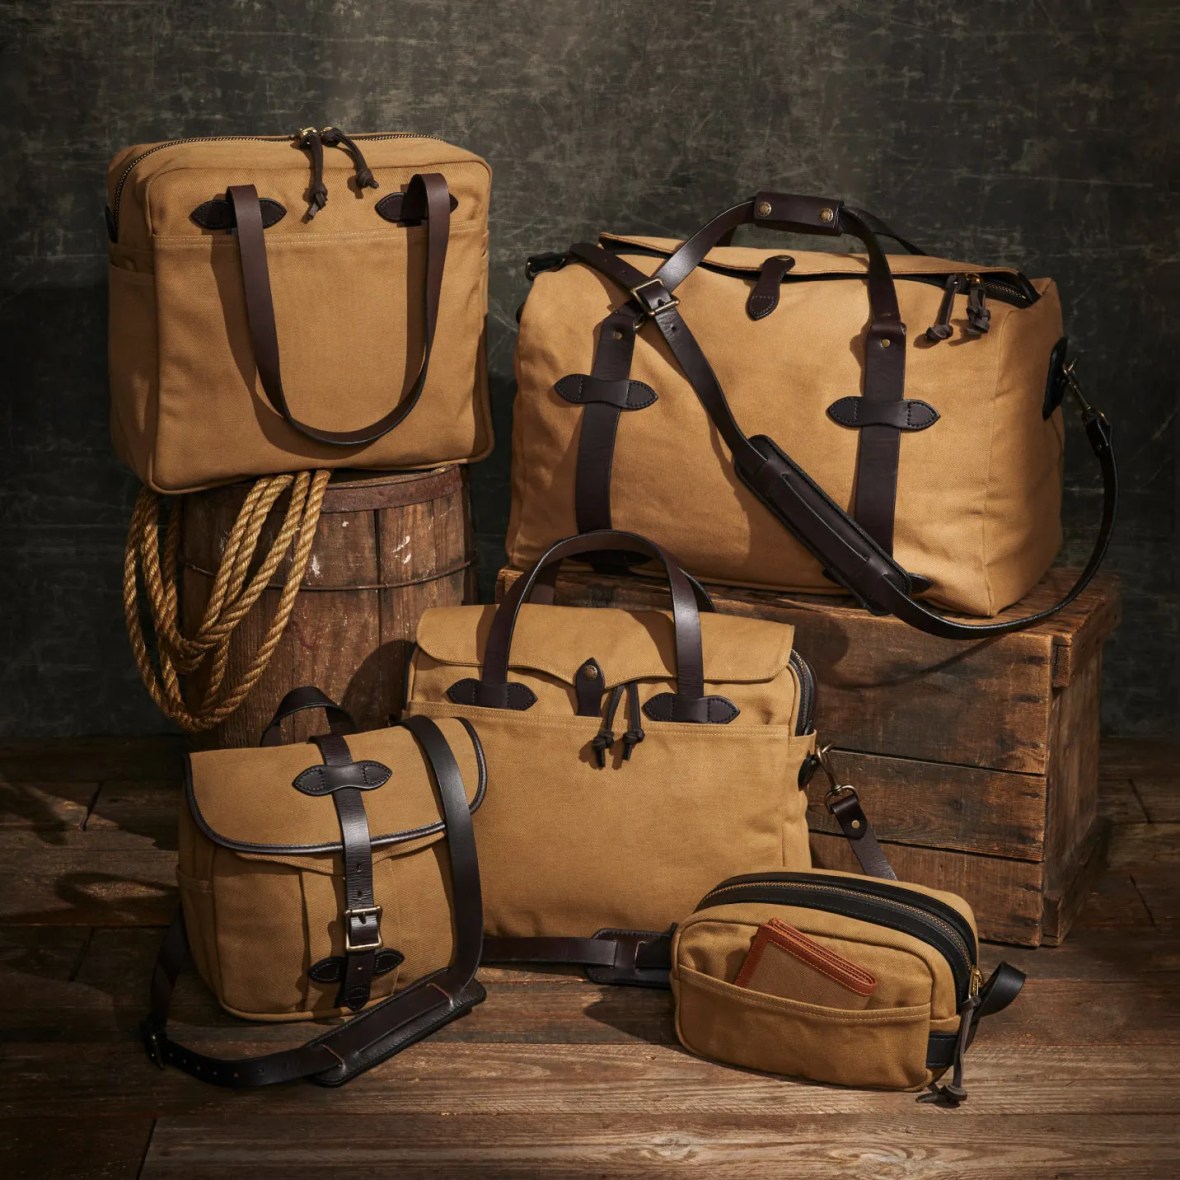 Filson Twill Bags This Filson Capsule Collection Is Inspired By 'Indiana Jones And